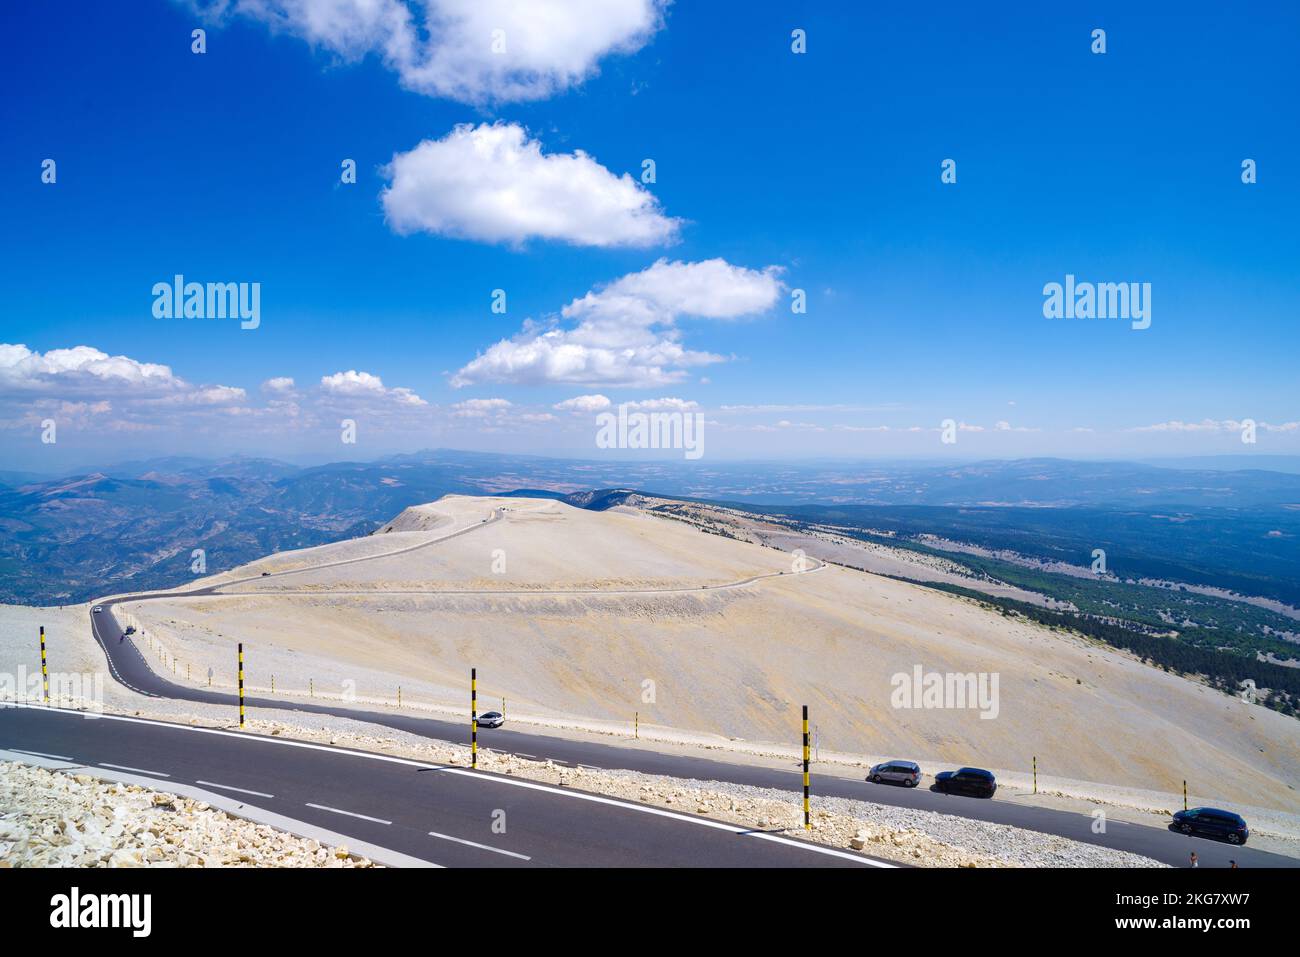 stunning view on top of Mont Ventoux. At 1,909 m (6,263 ft), it is the highest mountain in the region and has been nicknamed the 'Beast of Provence'. Stock Photo